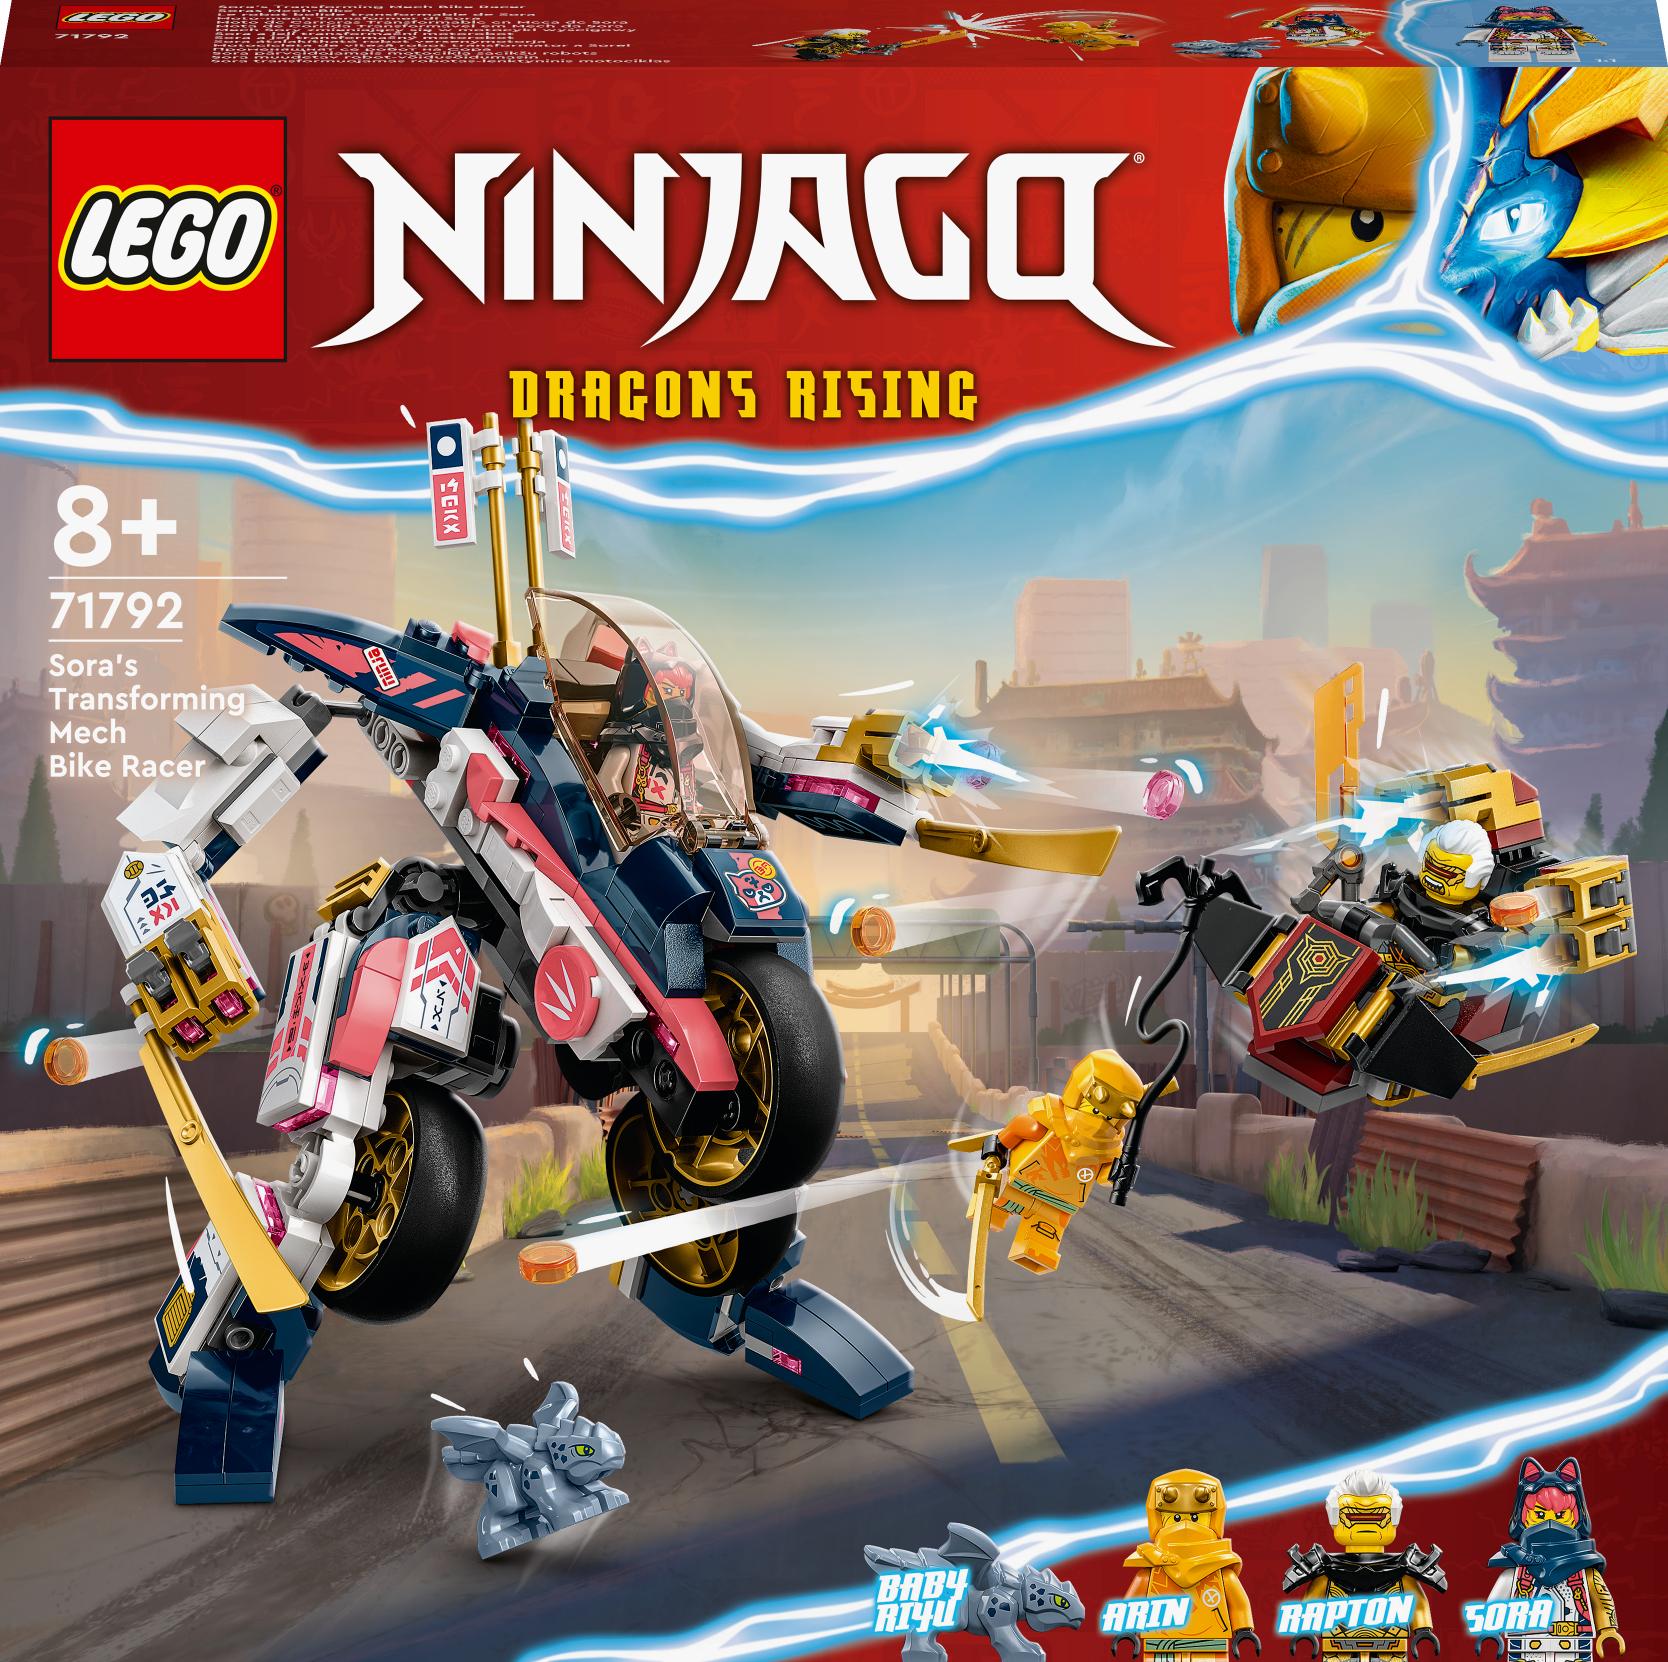 LEGO Ninjago Game & Film Double Pack for PlayStation 4